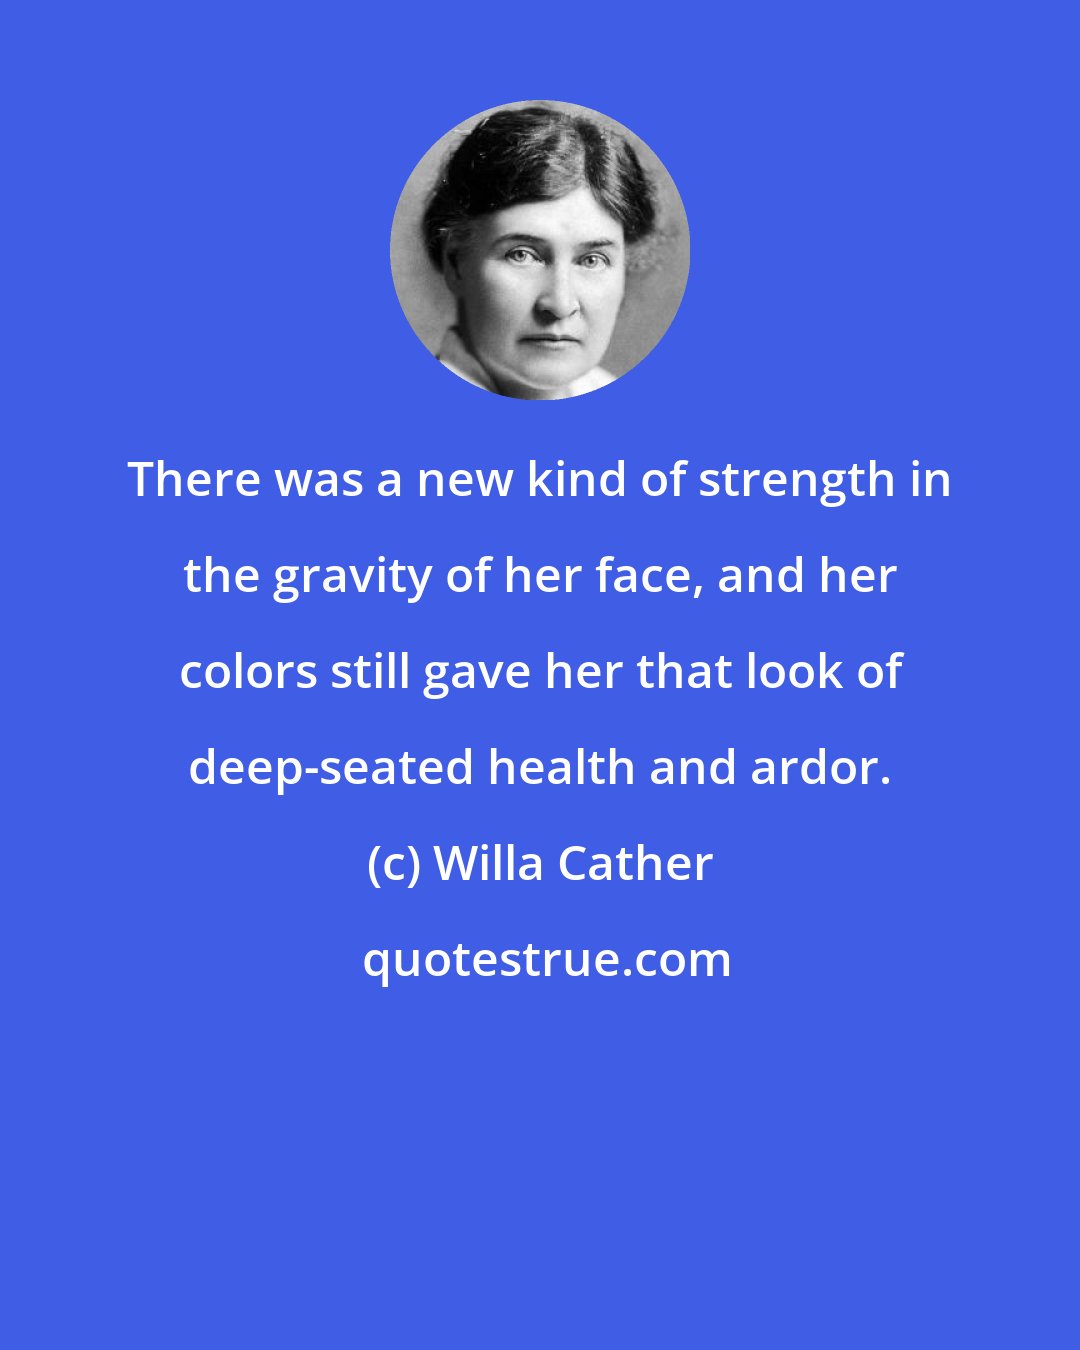 Willa Cather: There was a new kind of strength in the gravity of her face, and her colors still gave her that look of deep-seated health and ardor.